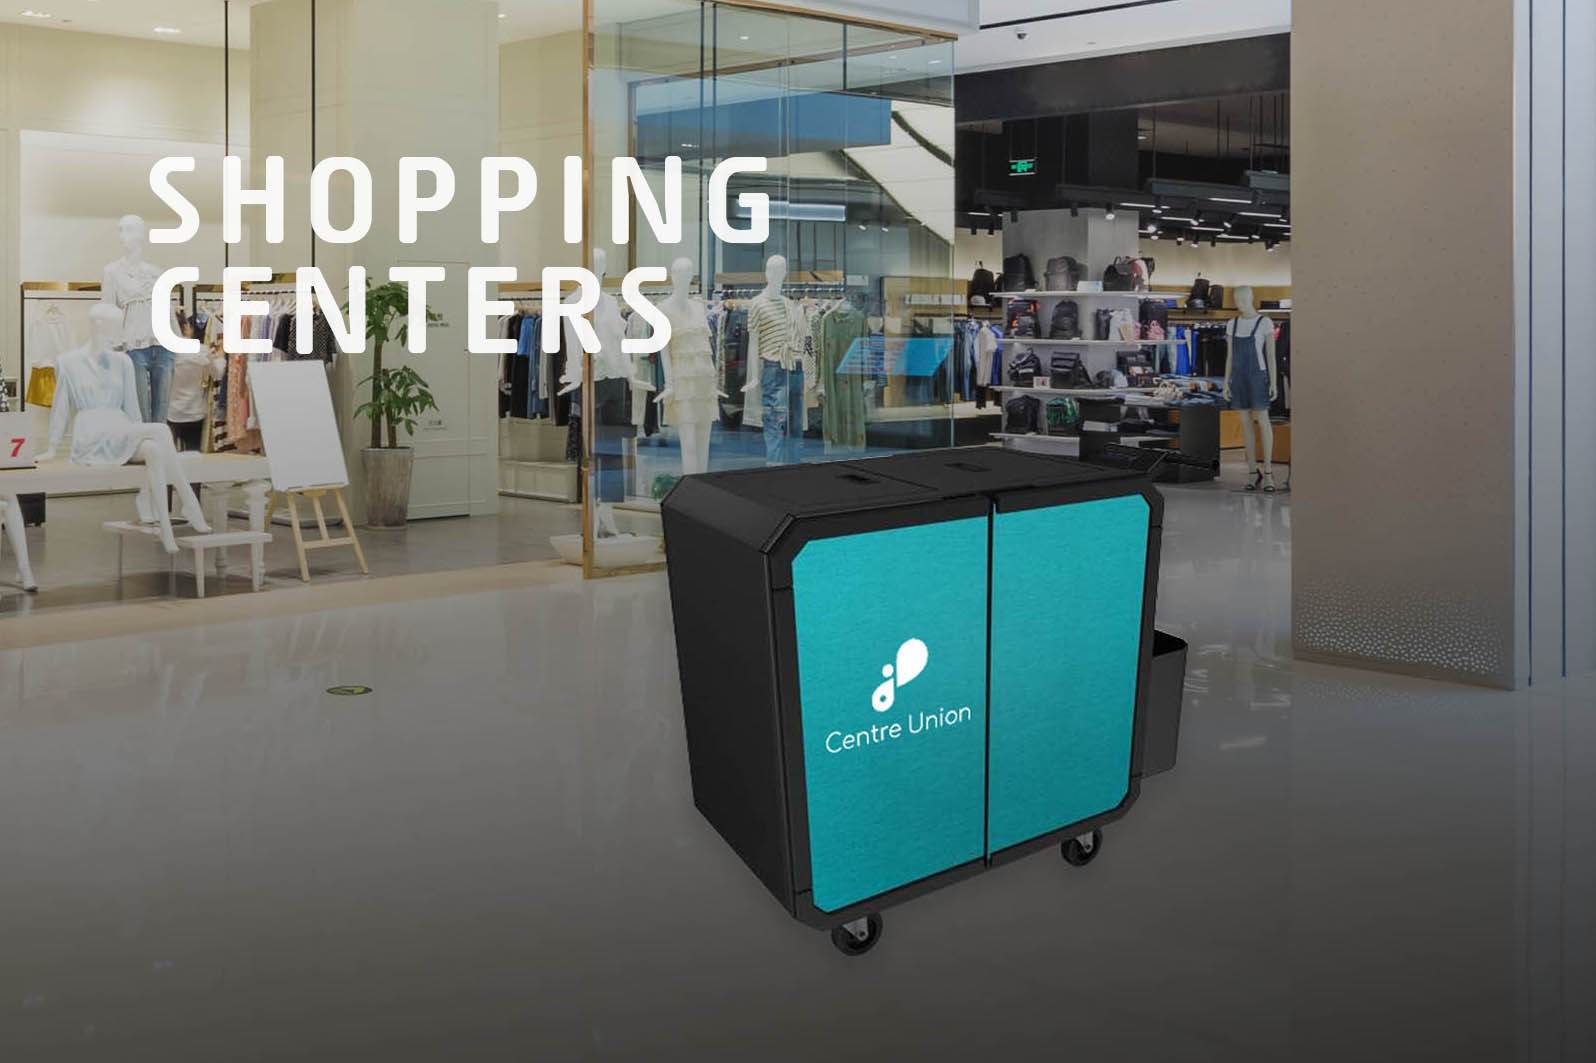 Netsmart professionnal cleaning trolley for shopping centers